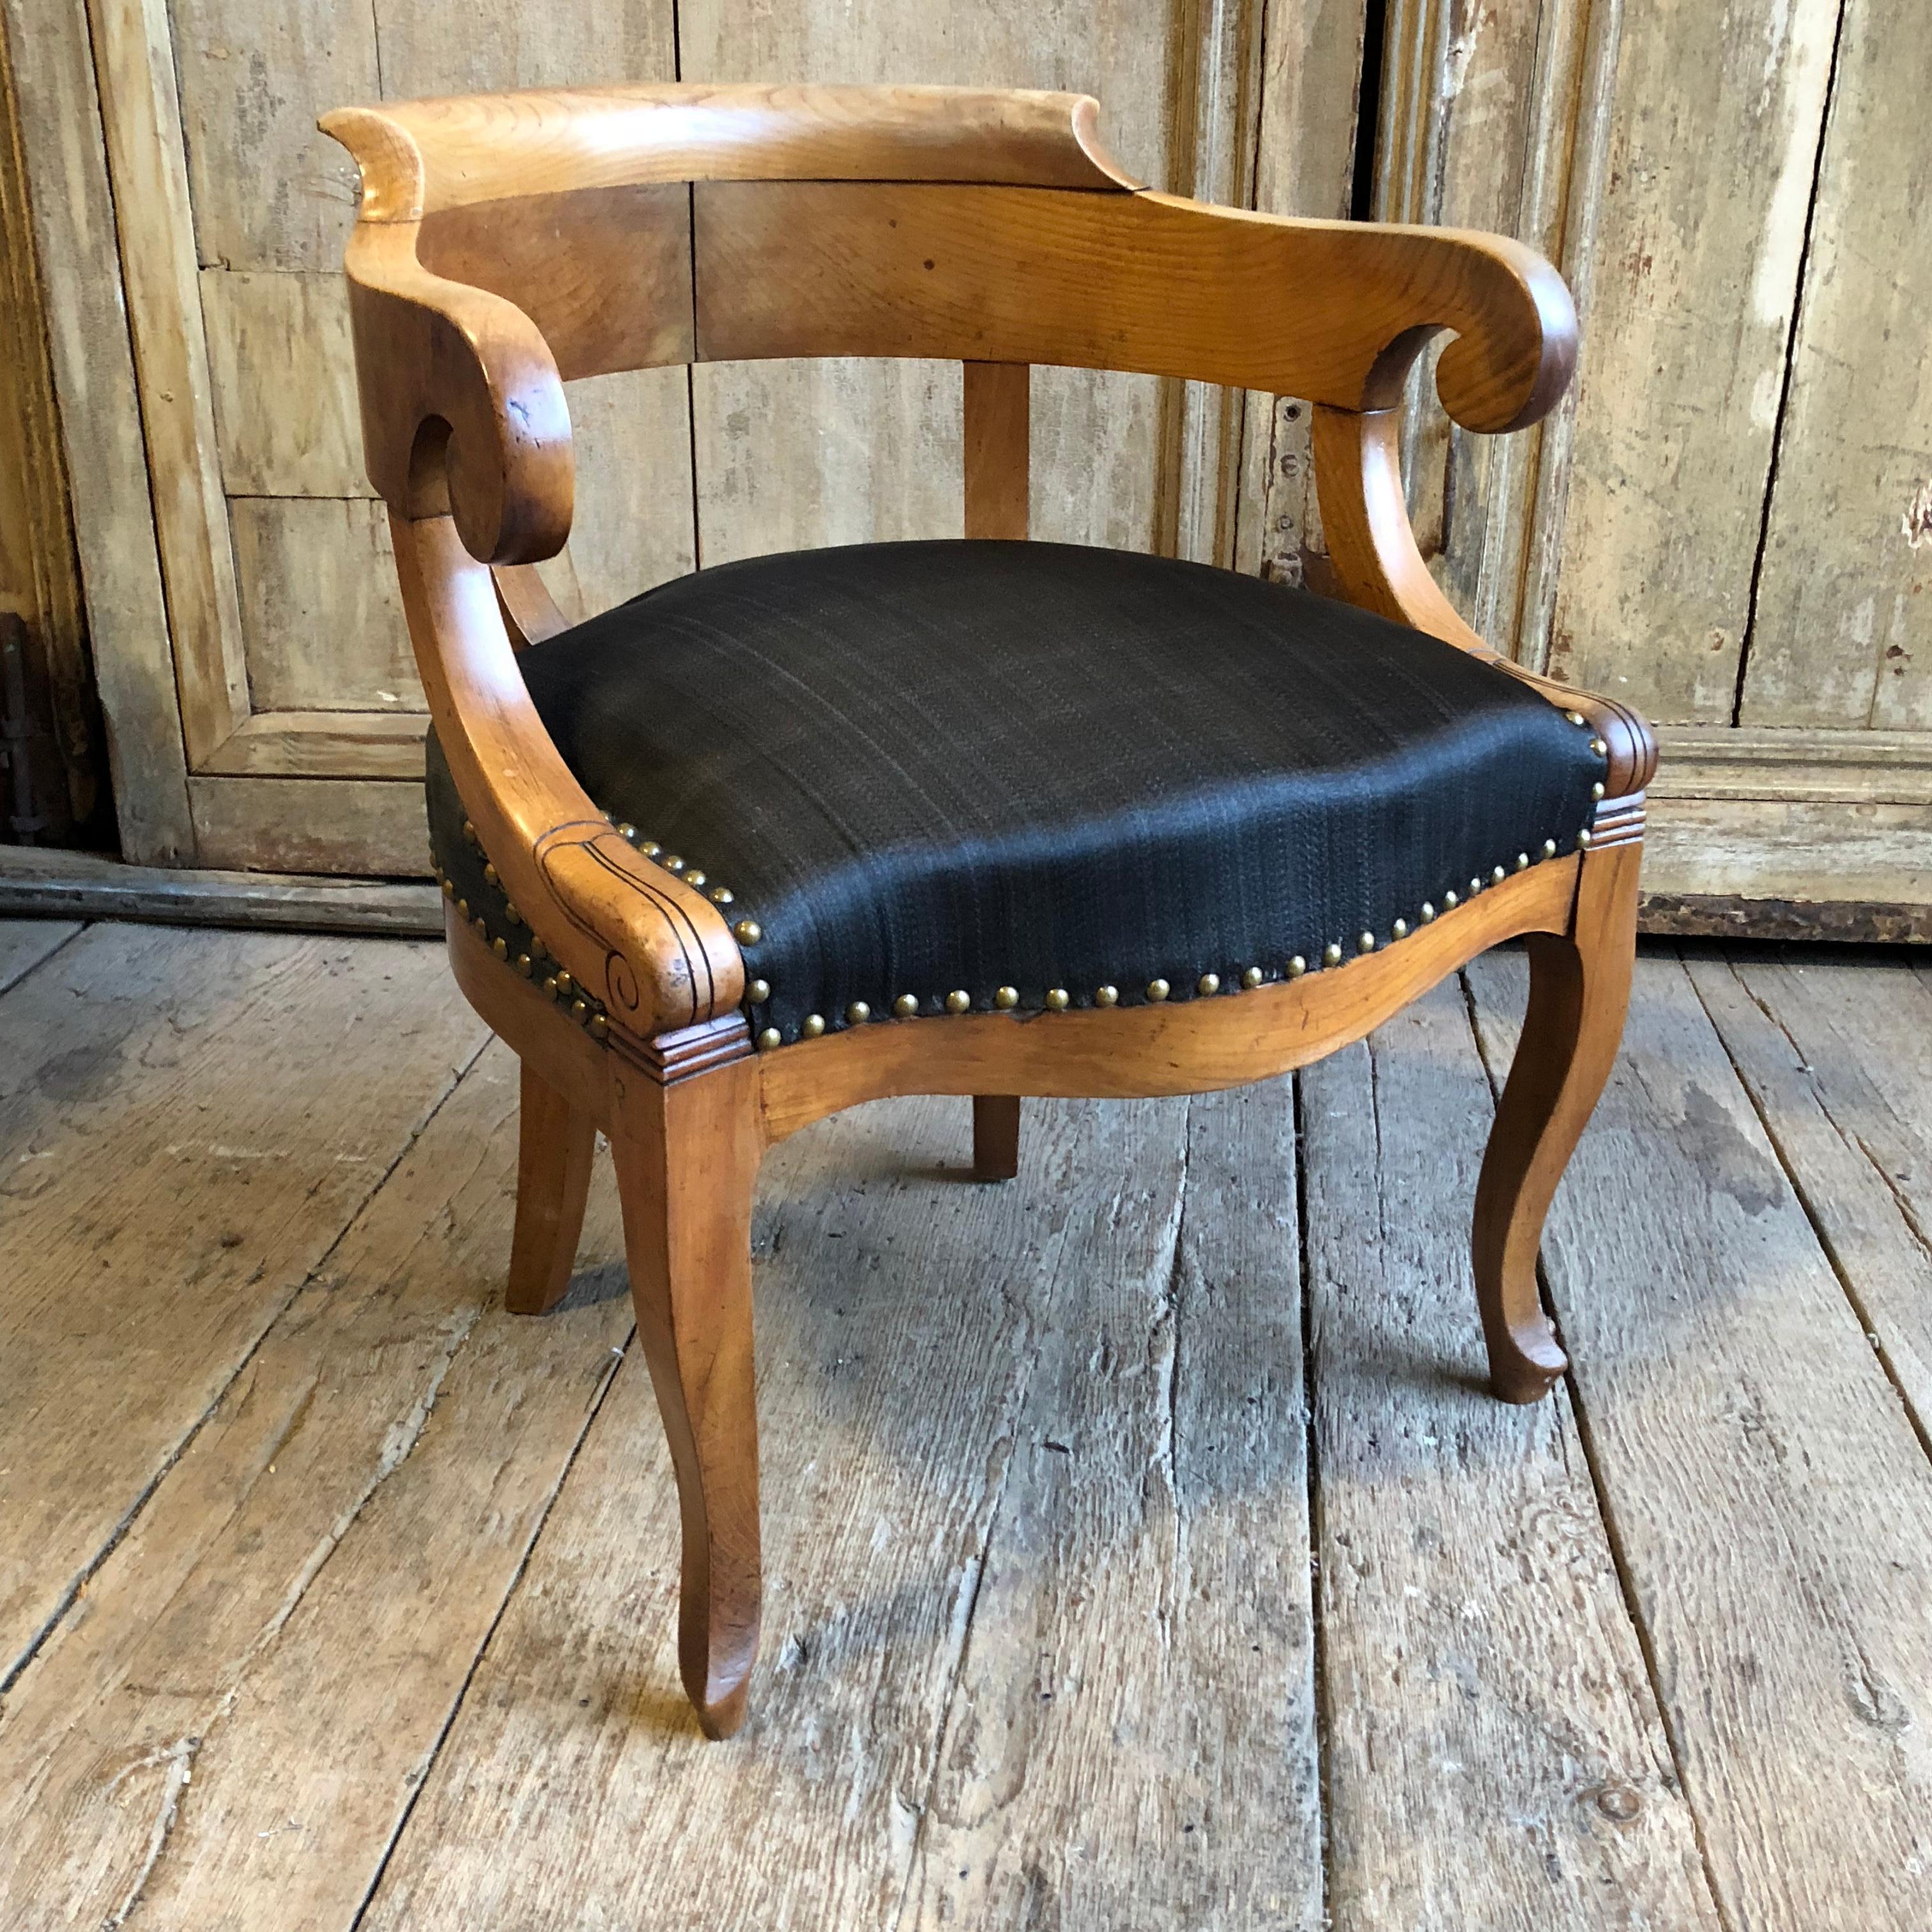 A Charles X period “Fauteuil de bureau” with a yoke-back, low arms and upholstered seat on cabriole legs, in blonde fruitwood, circa 1820.  The Charles X style, also known as “Restauration Period Style” and it’s use of “bois Claire” or light woods,